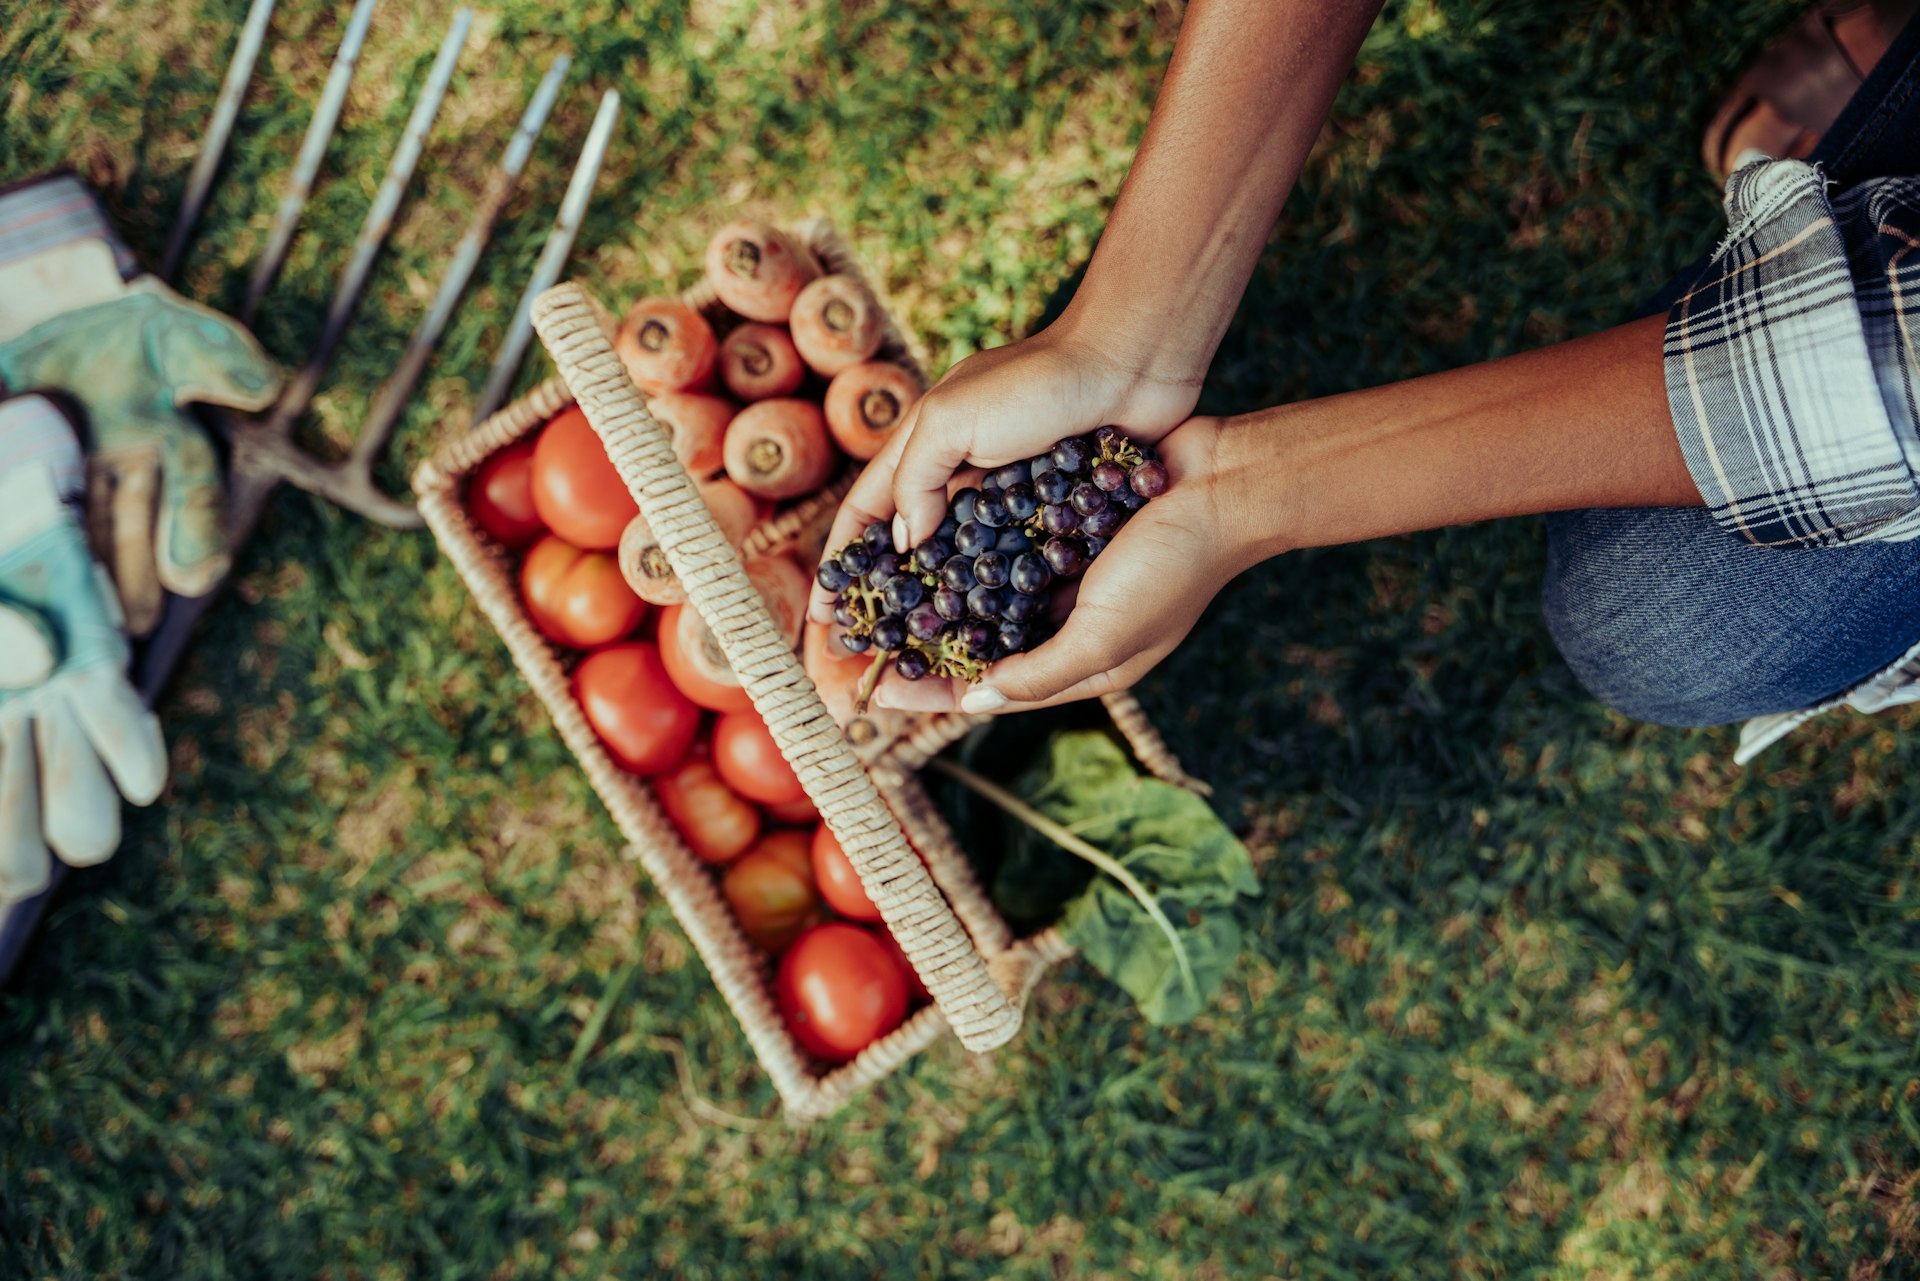 Mixed race female crouching down holding bunch of grapes in cupped hands above basket of fresh vegetables